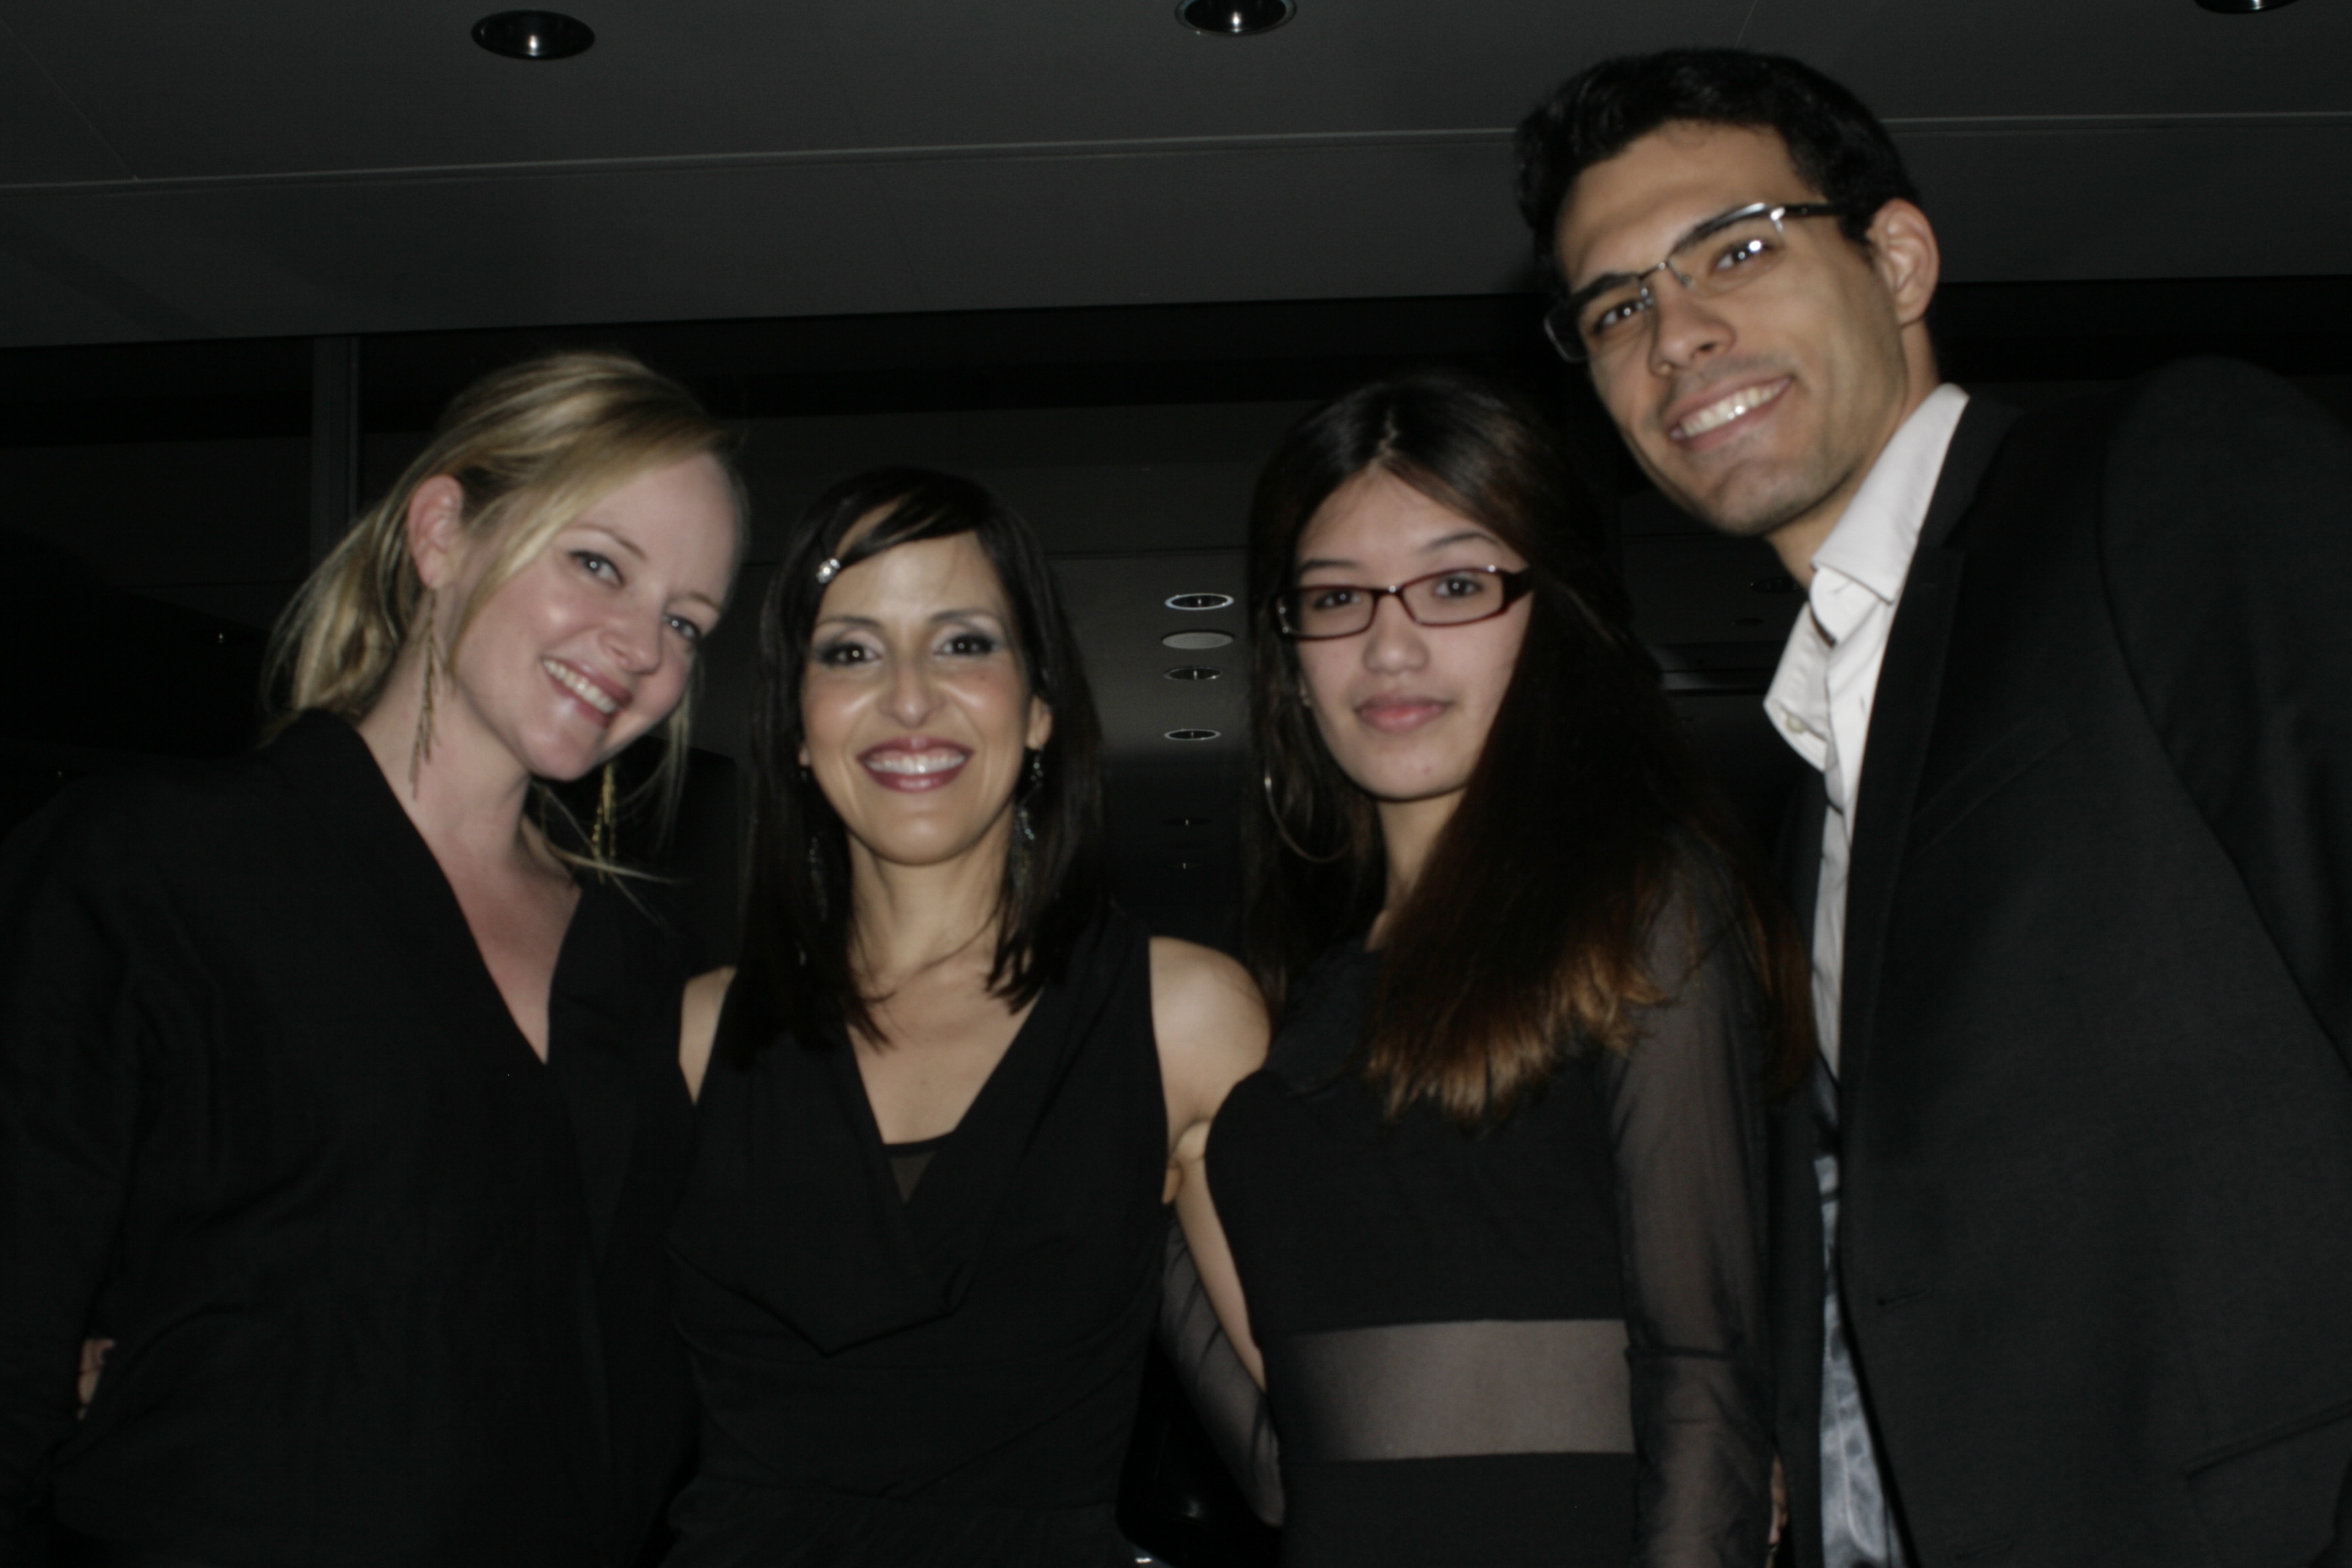 Marley Shelton Marilyn Sanabria Giselle Rose Geovanni Gopradi. Geovanni Gopradi attended the NFMLA event on Saturday 11, 2014 and enjoyed a good time with the 'Mediation' film cast and crew